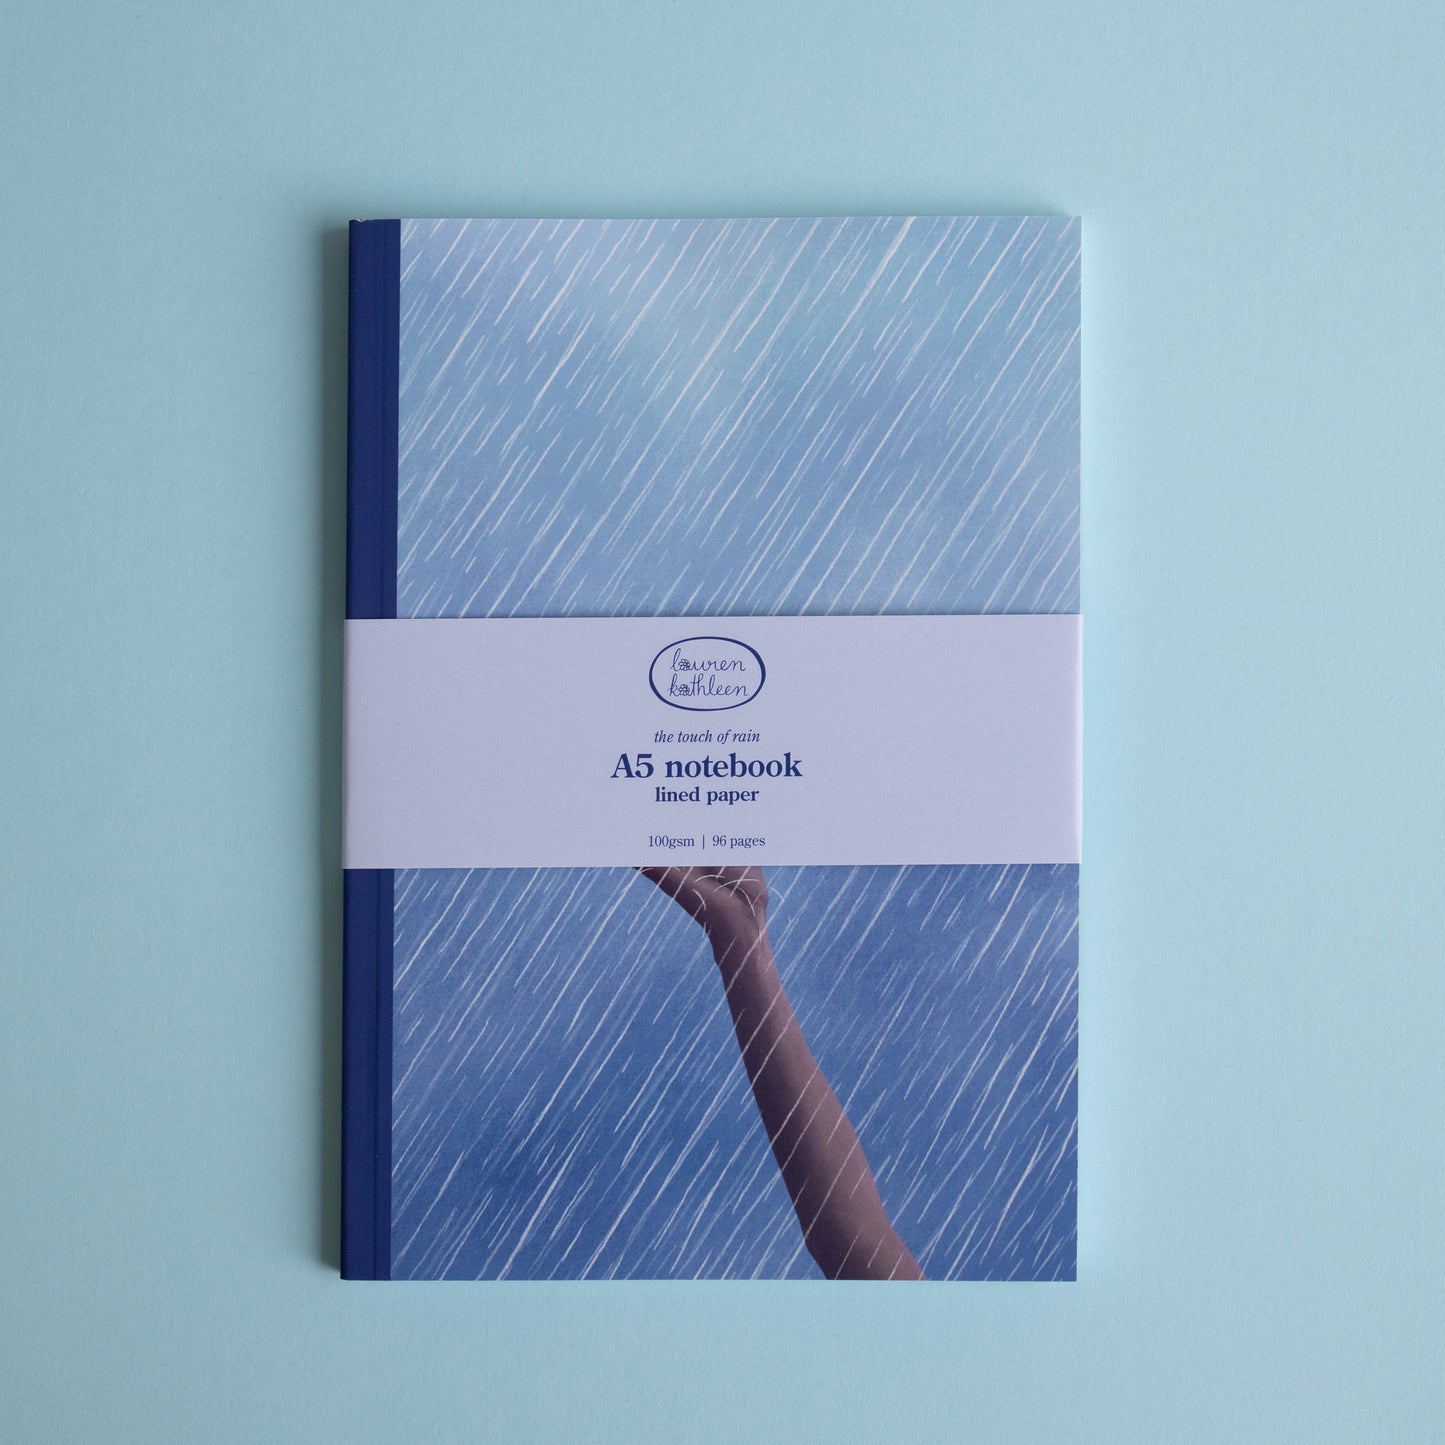 A5 notebook - the touch of rain